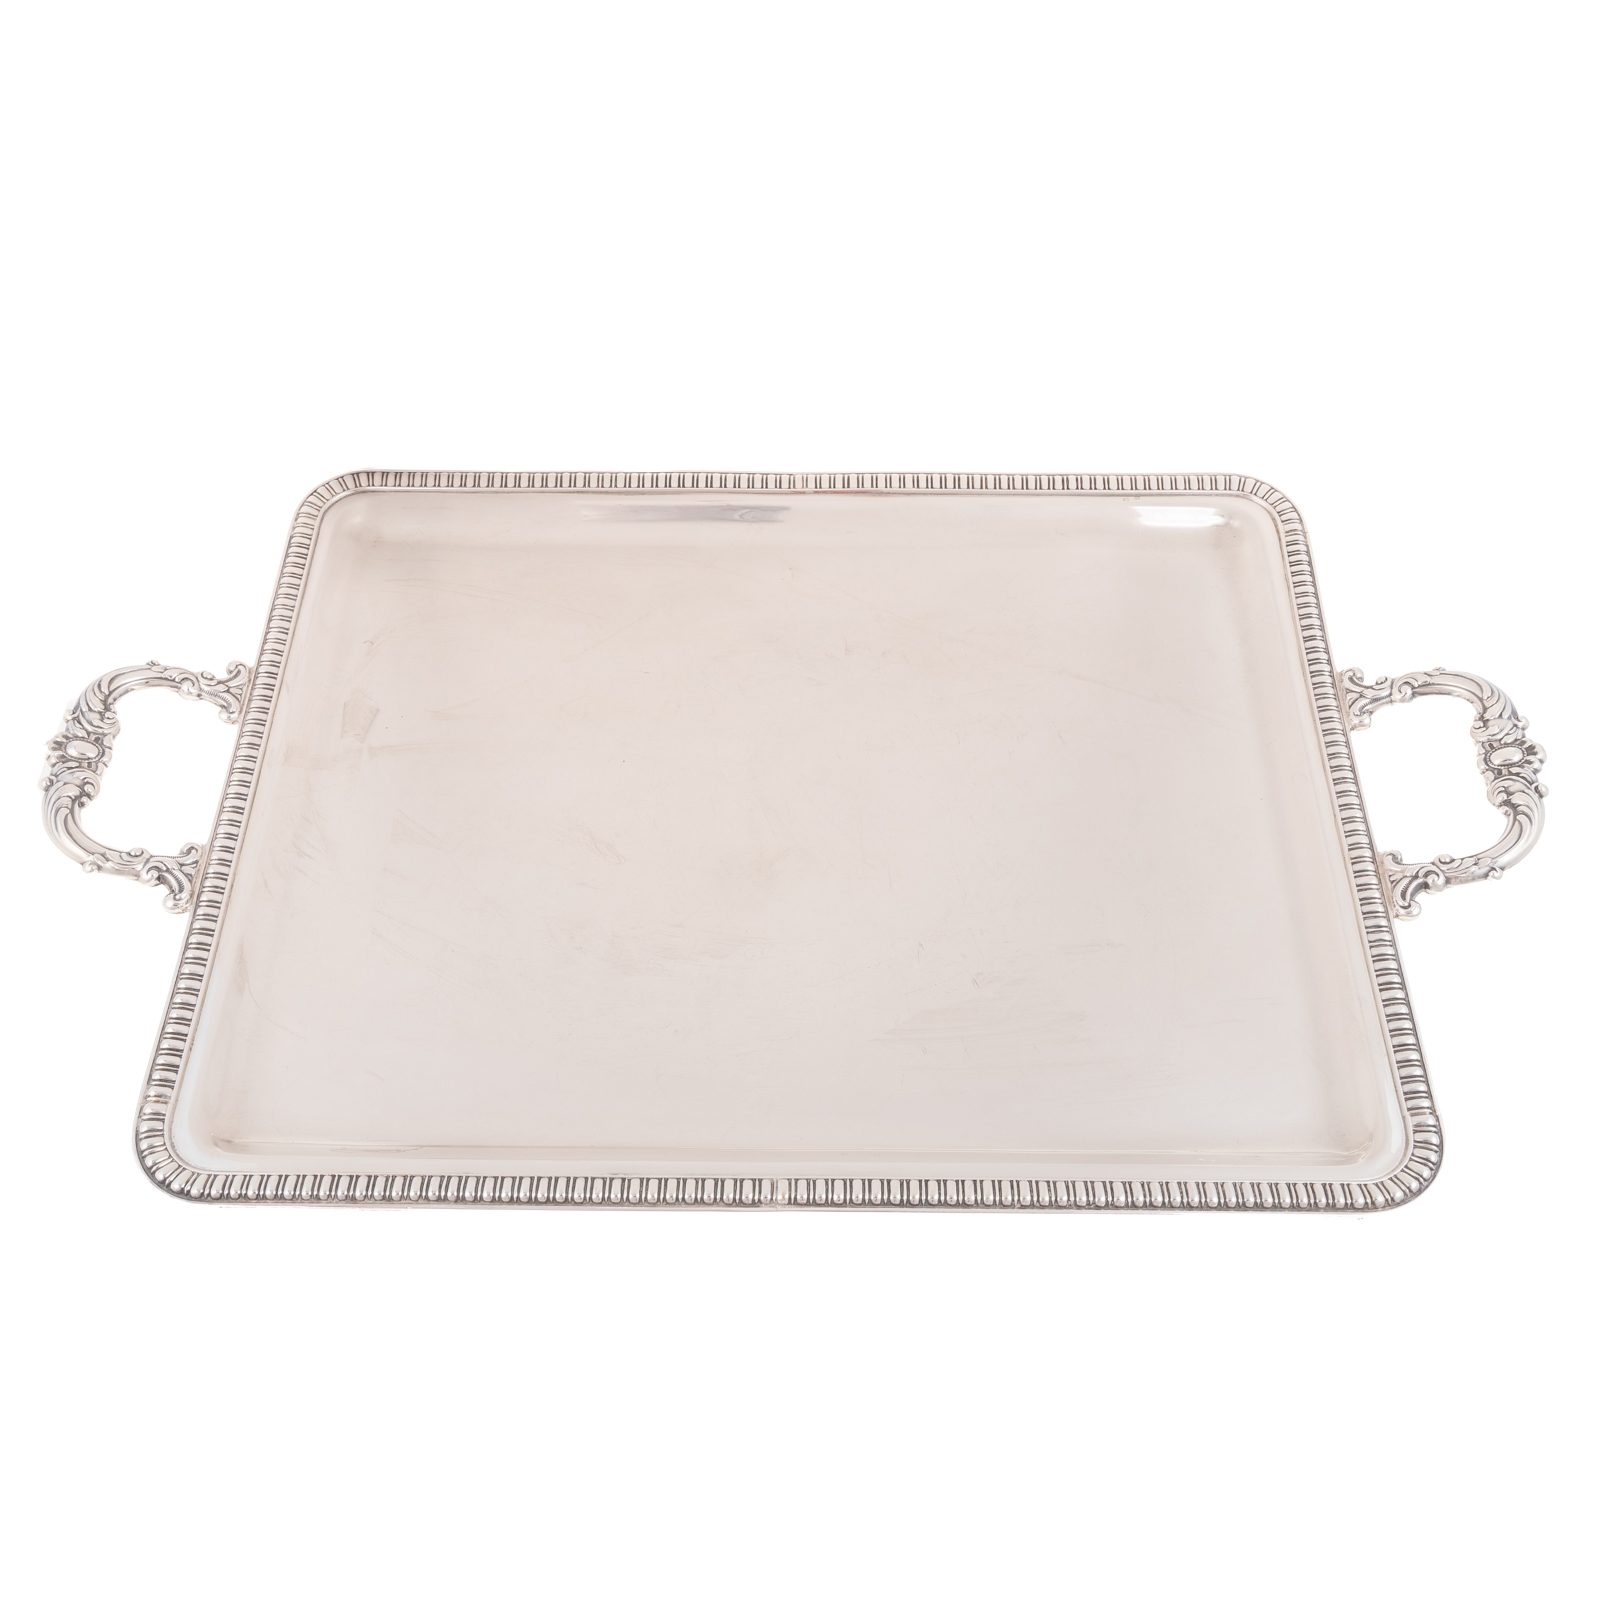 SPANISH SILVER SERVING TRAY 915 2eadc7